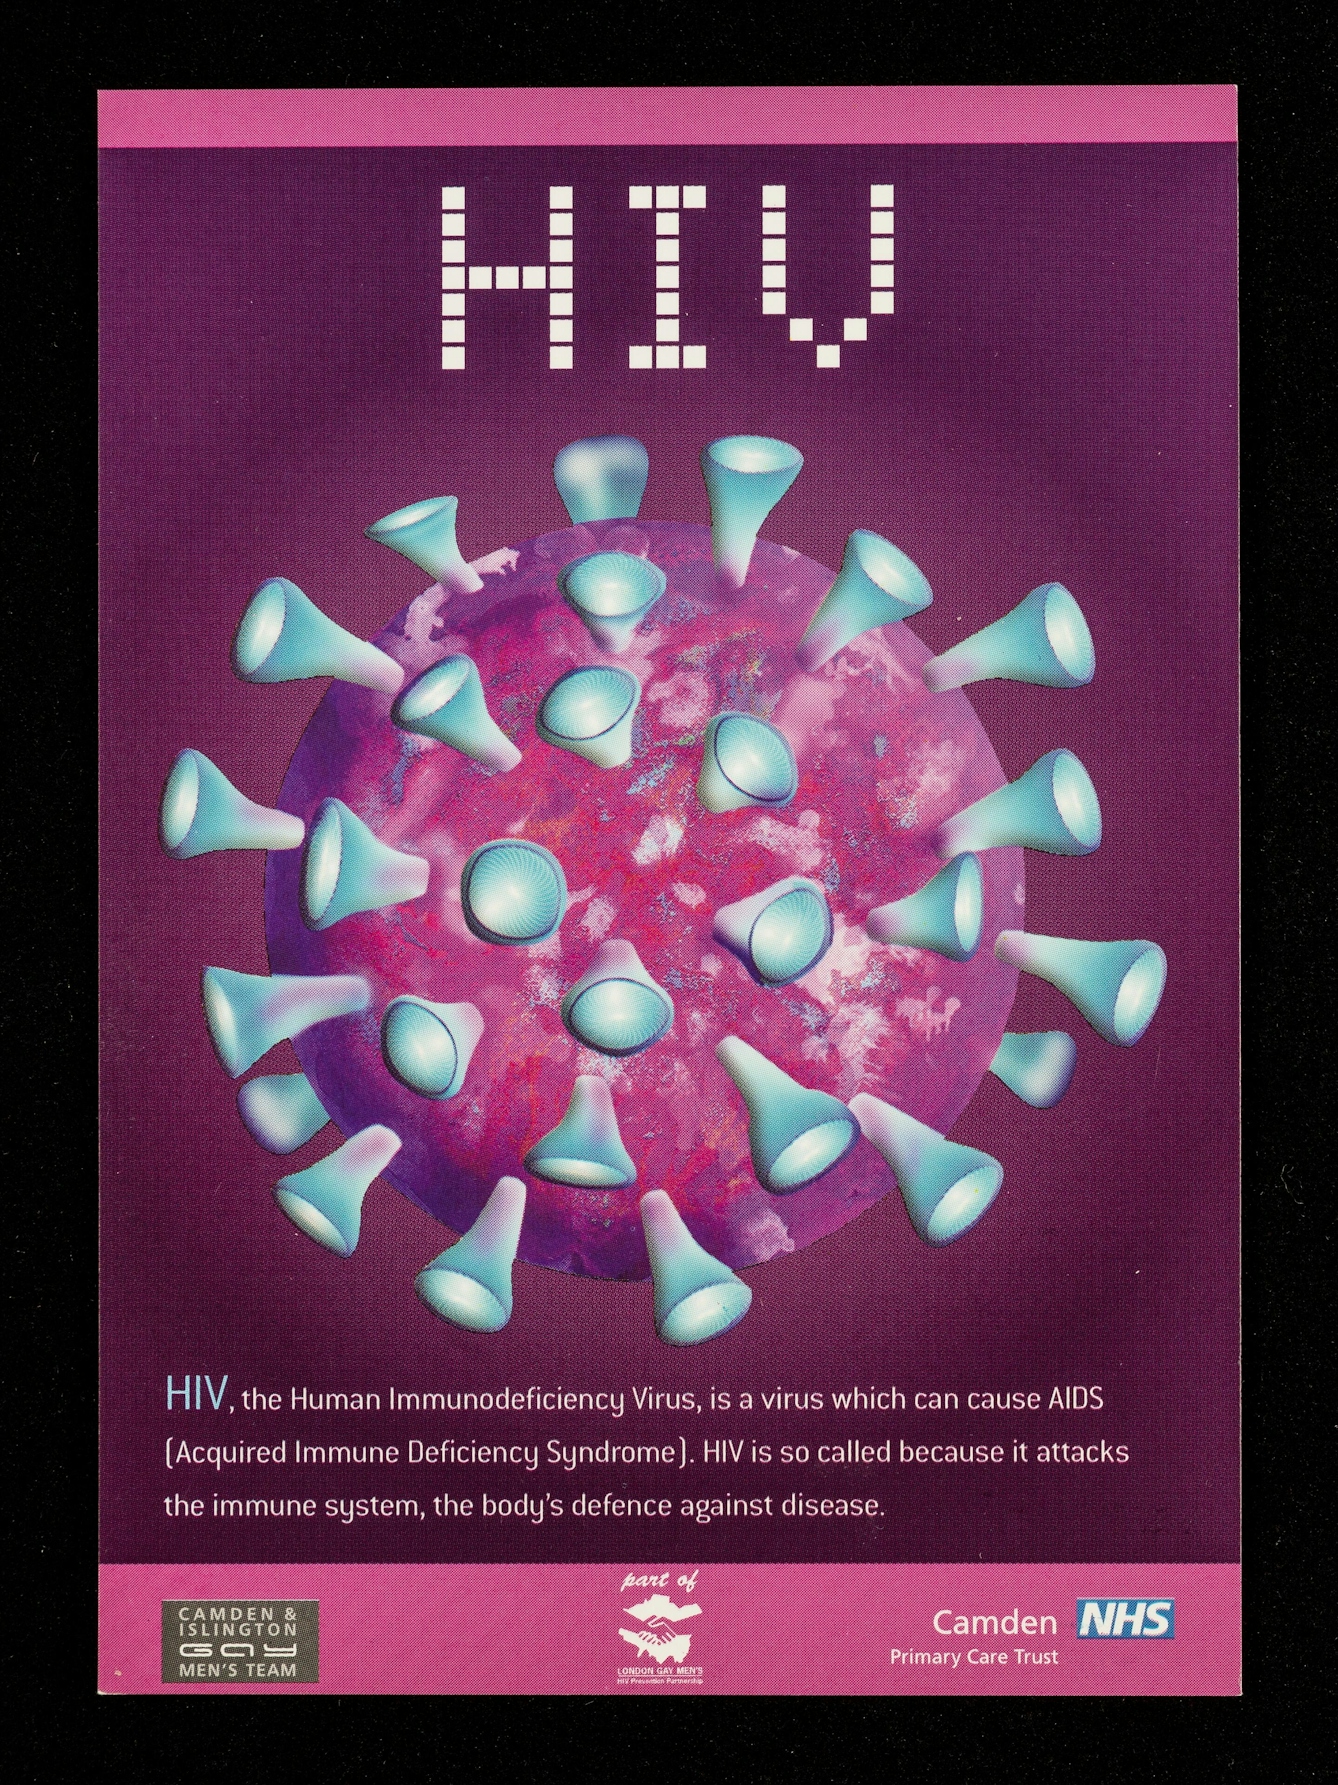 Purple and pink poster featuring a large illustration of the HIV virus